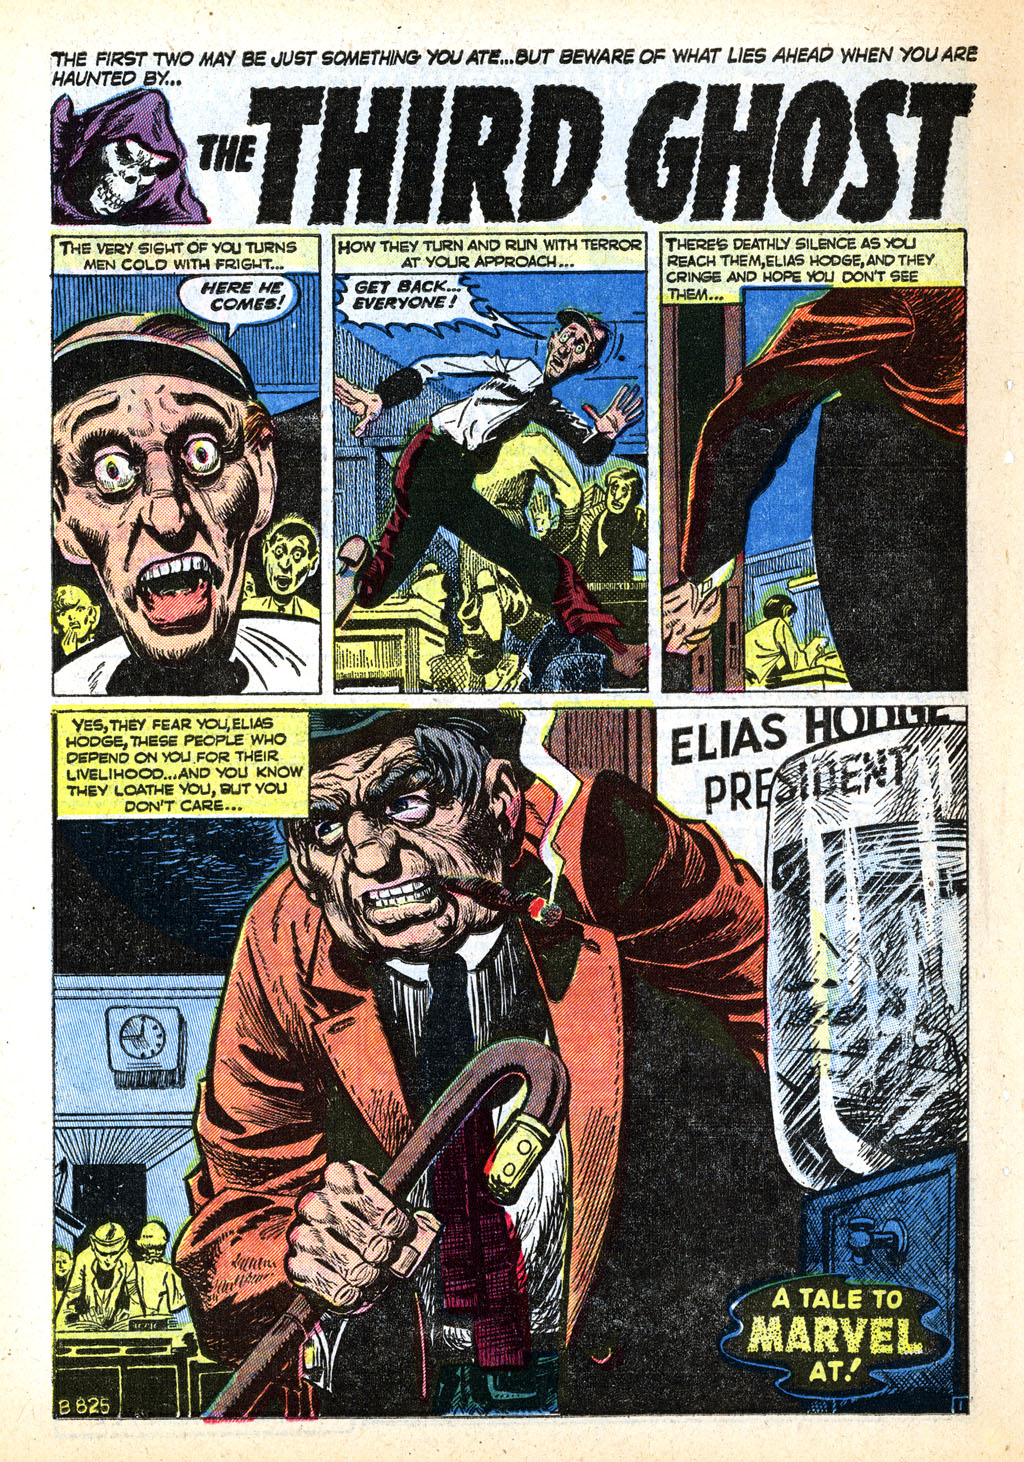 Marvel Tales (1949) 112 Page 25